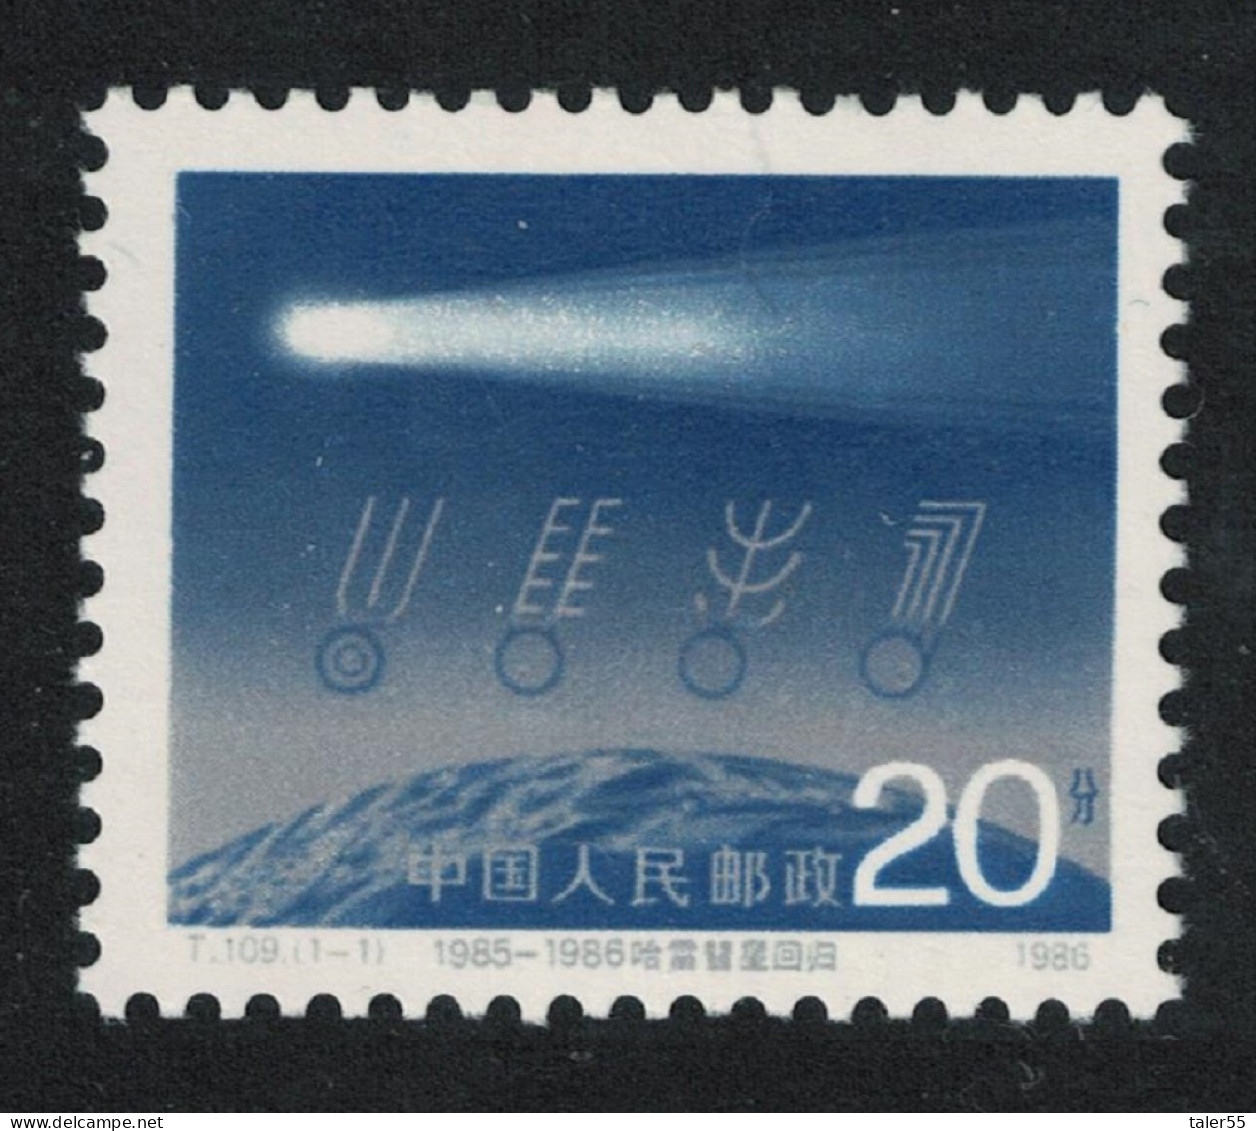 China Appearance Of Halley's Comet 1986 MNH SG#3449 MI#2073 Sc#2032 - Unused Stamps